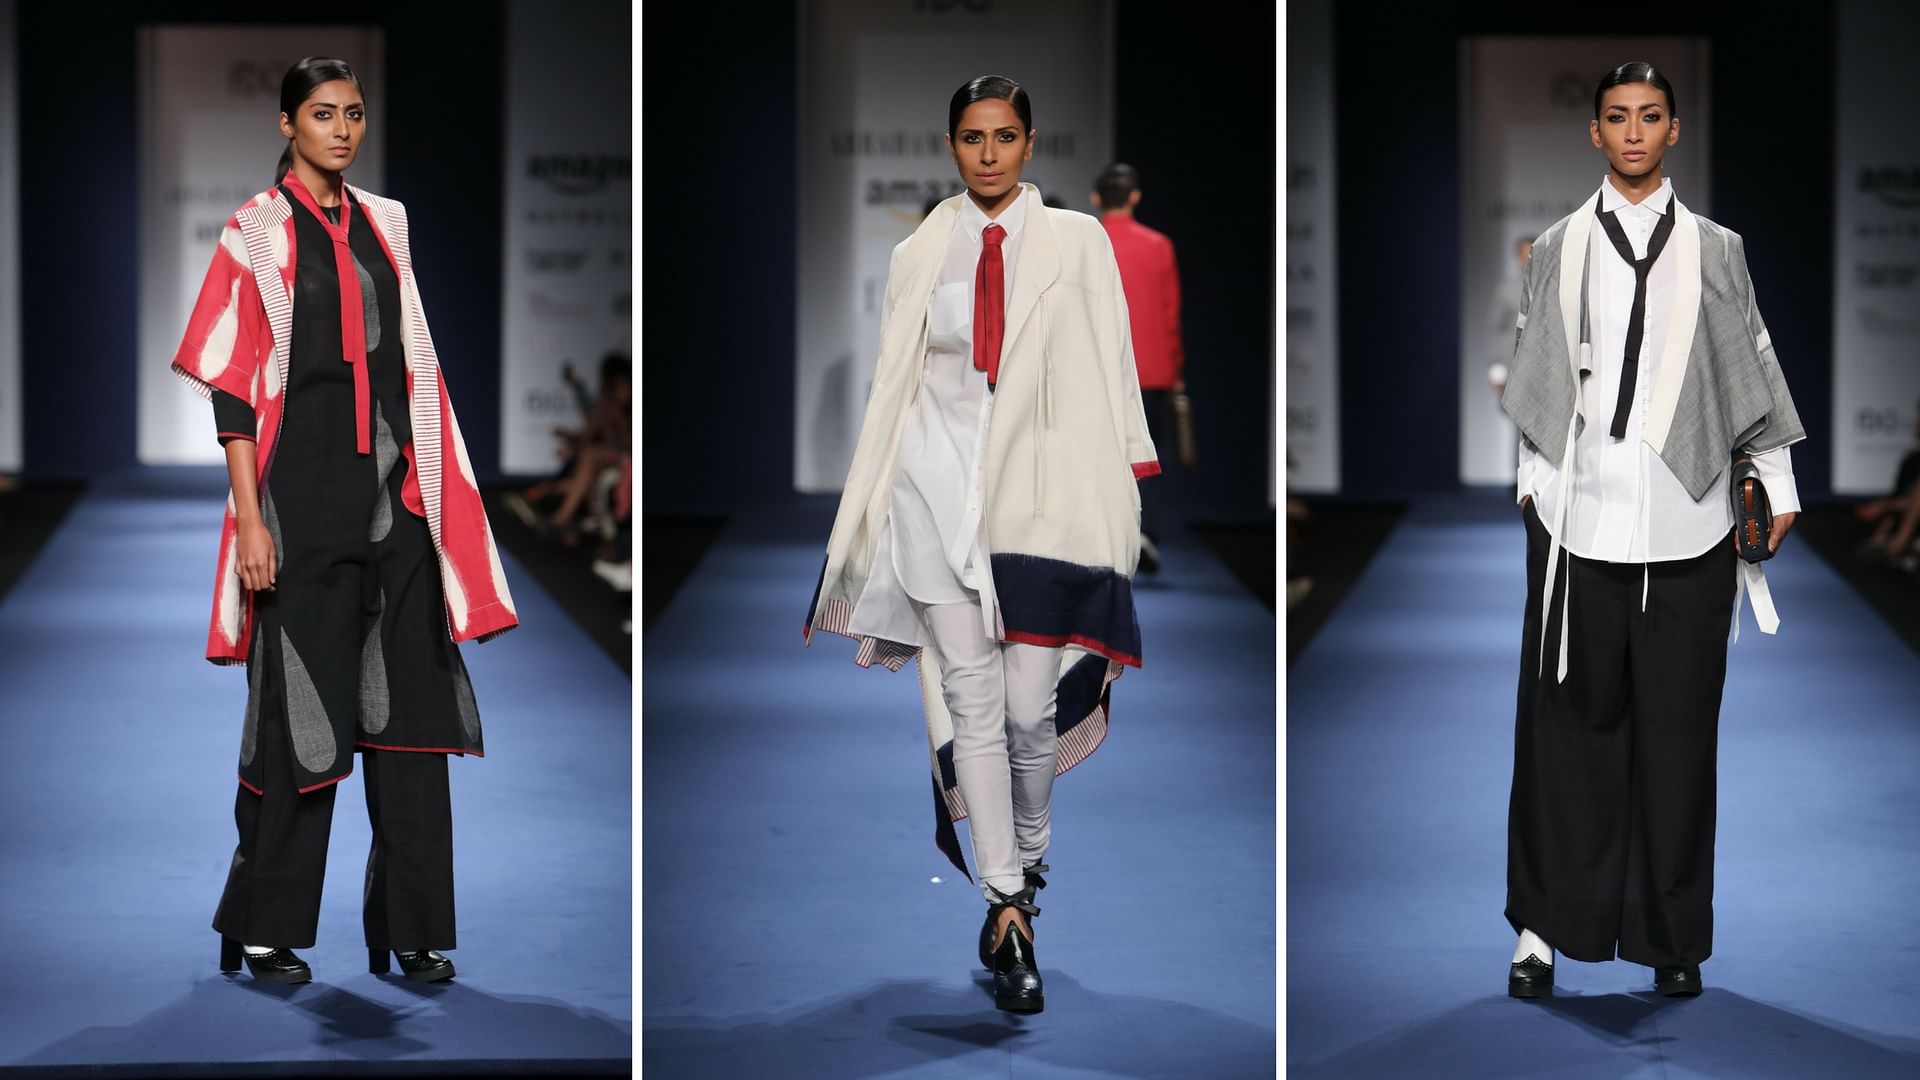 Ties with kurta and pants as seen at the Abraham and Thakore show presented at Amazon India Fashion Week. (Photo: FDCI)